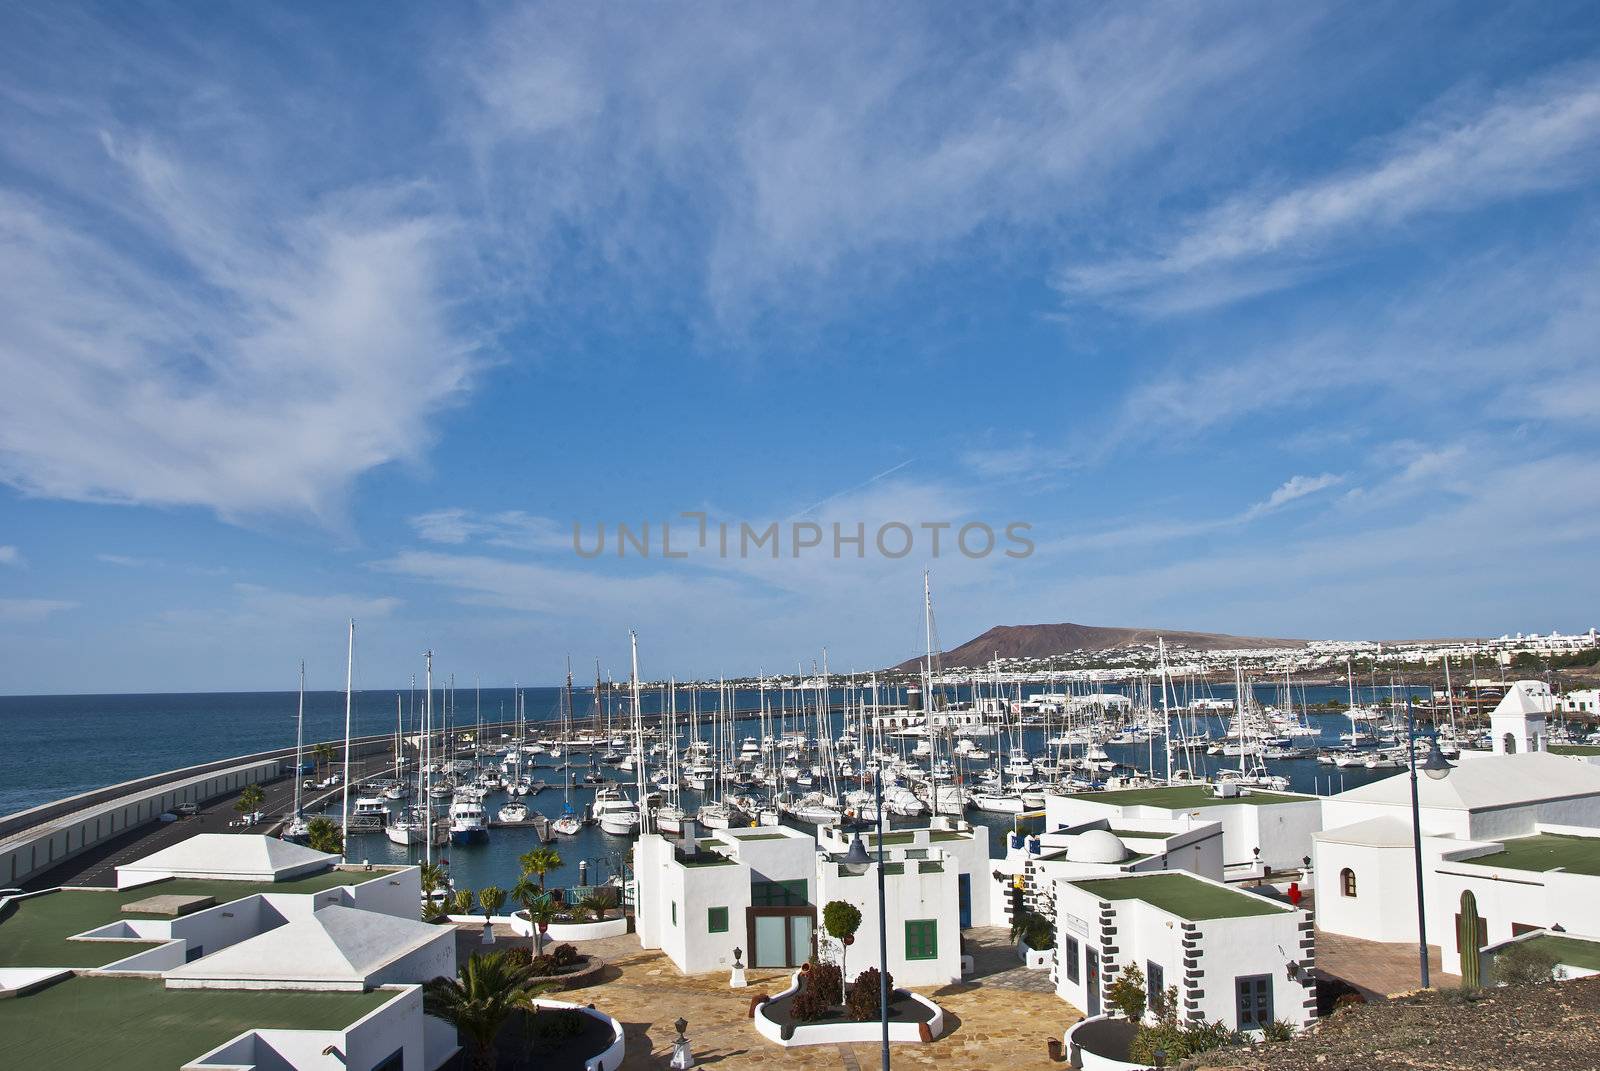 A View of the yacht marina and resort of Playa Blanca Lanzarote Canary Islands